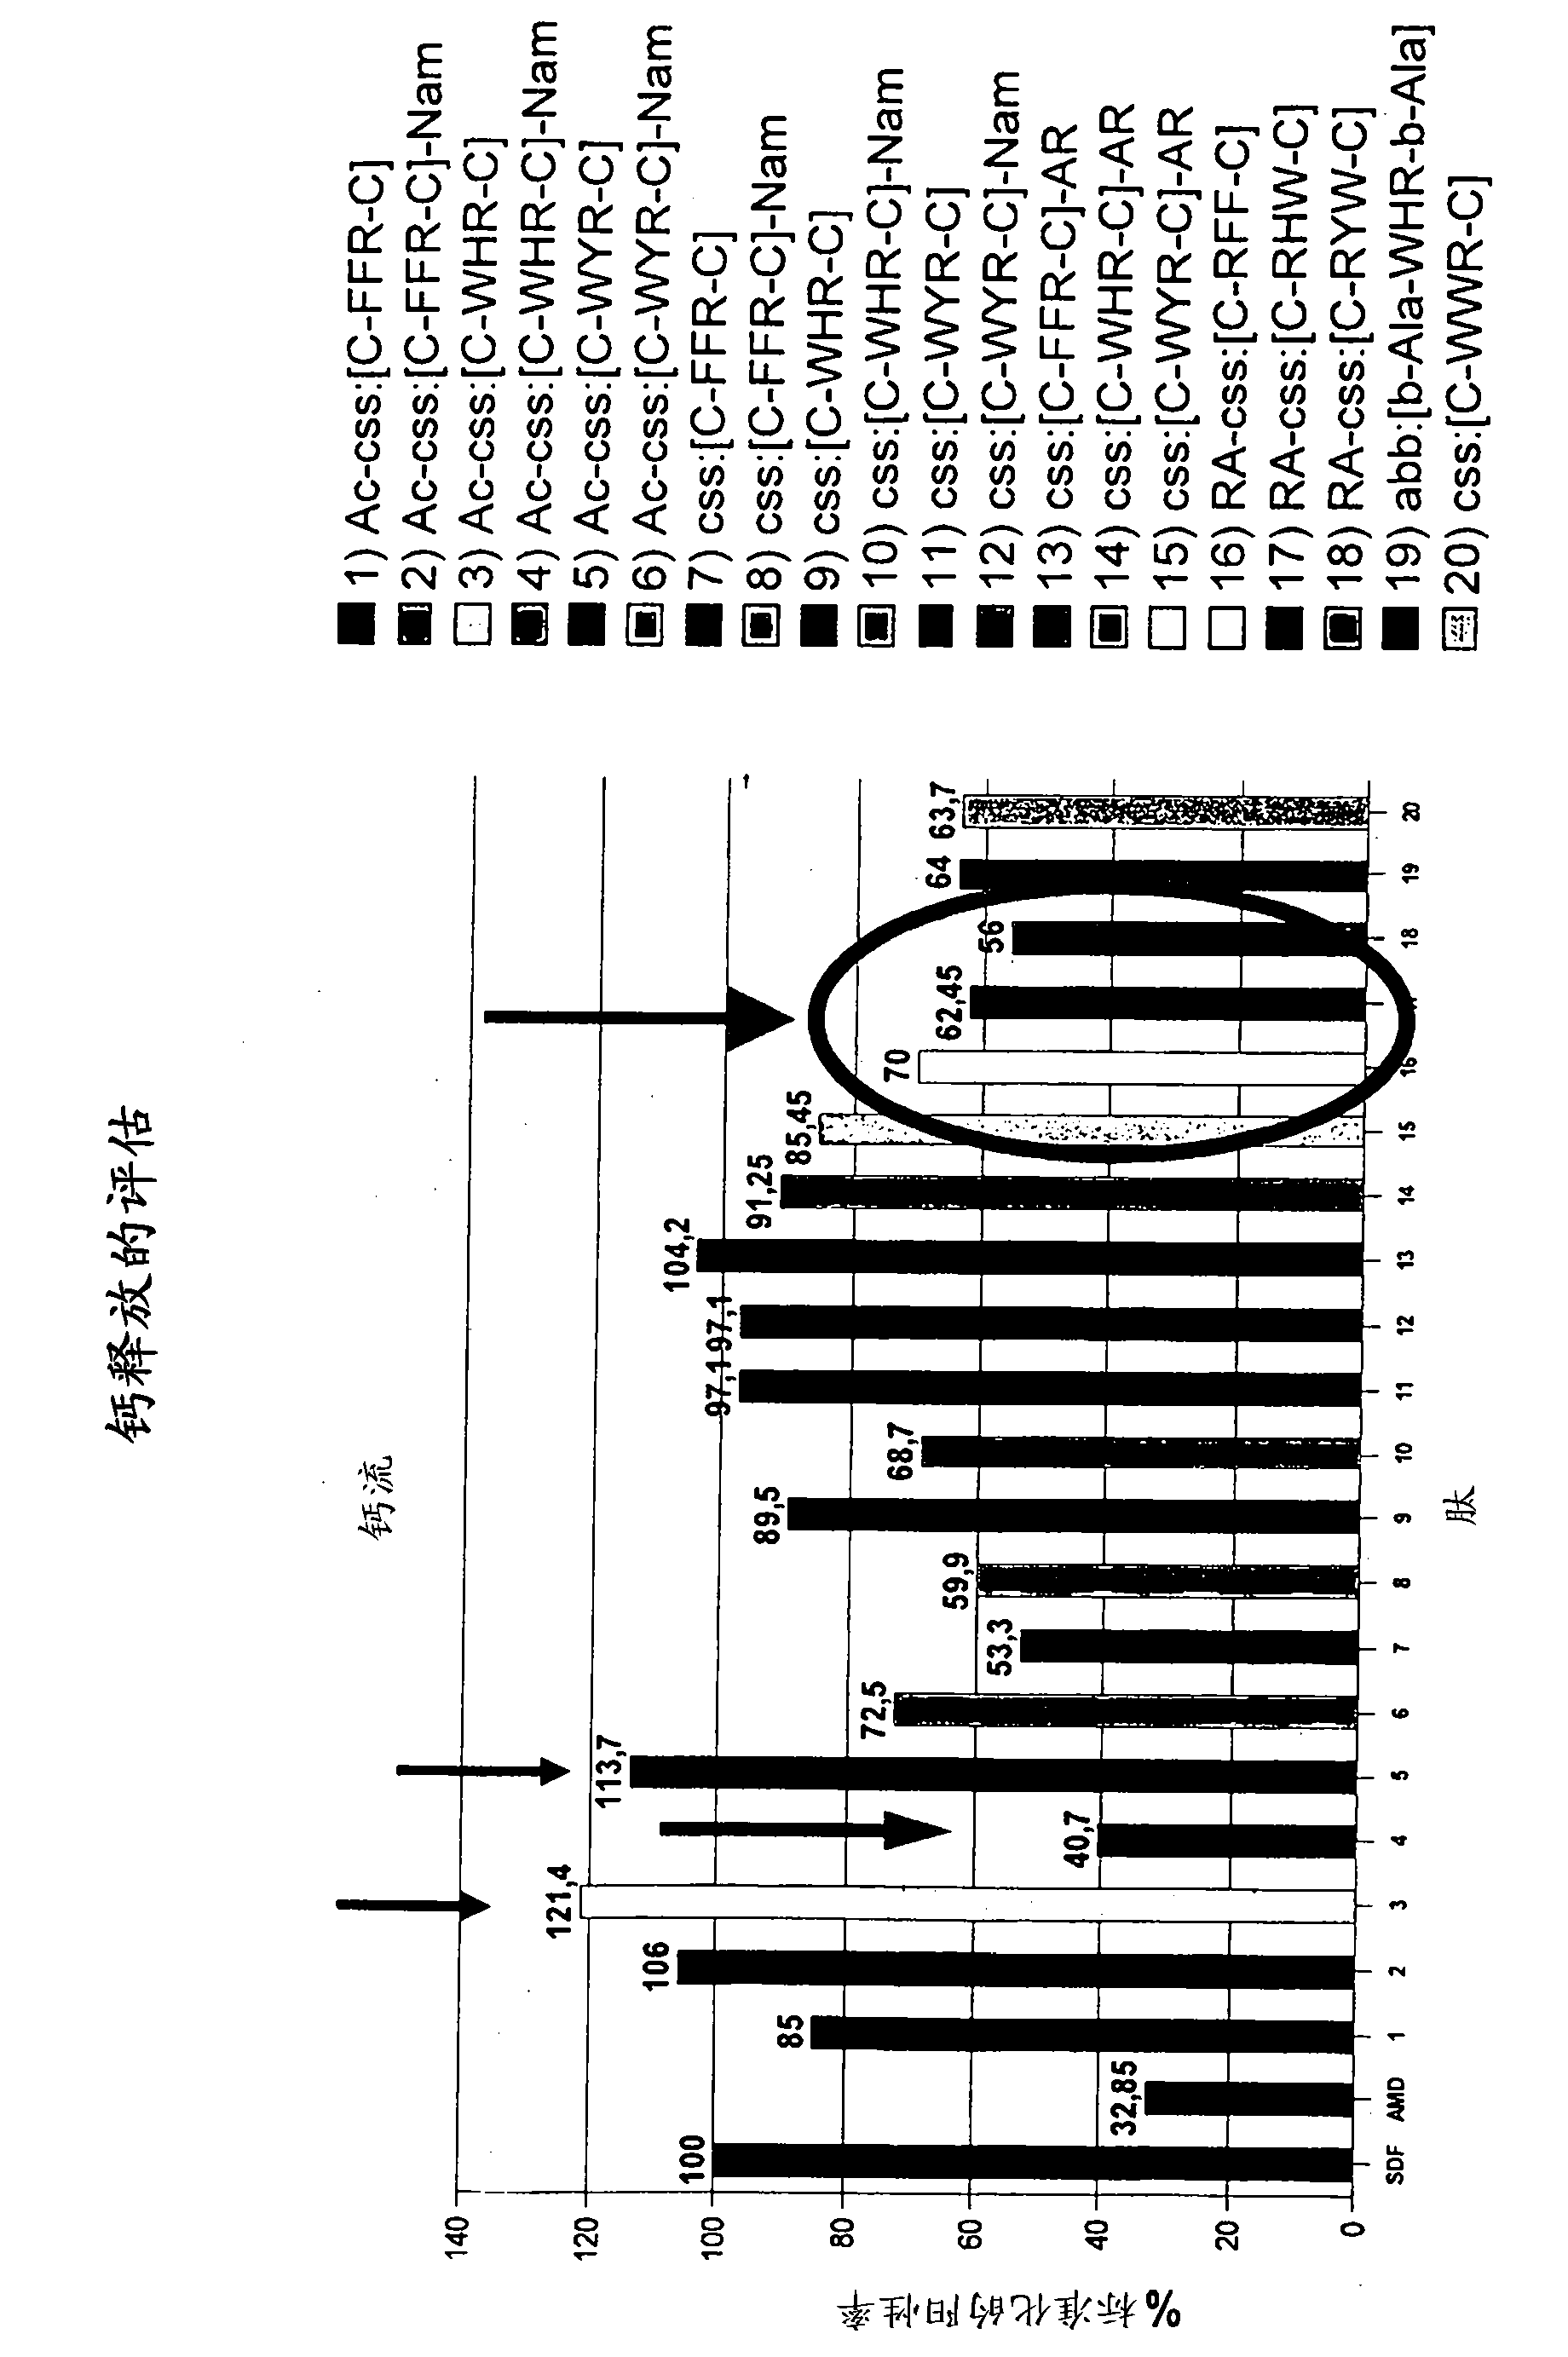 Cyclic peptides binding CXCR4 receptor and relative medical and diagnostic uses